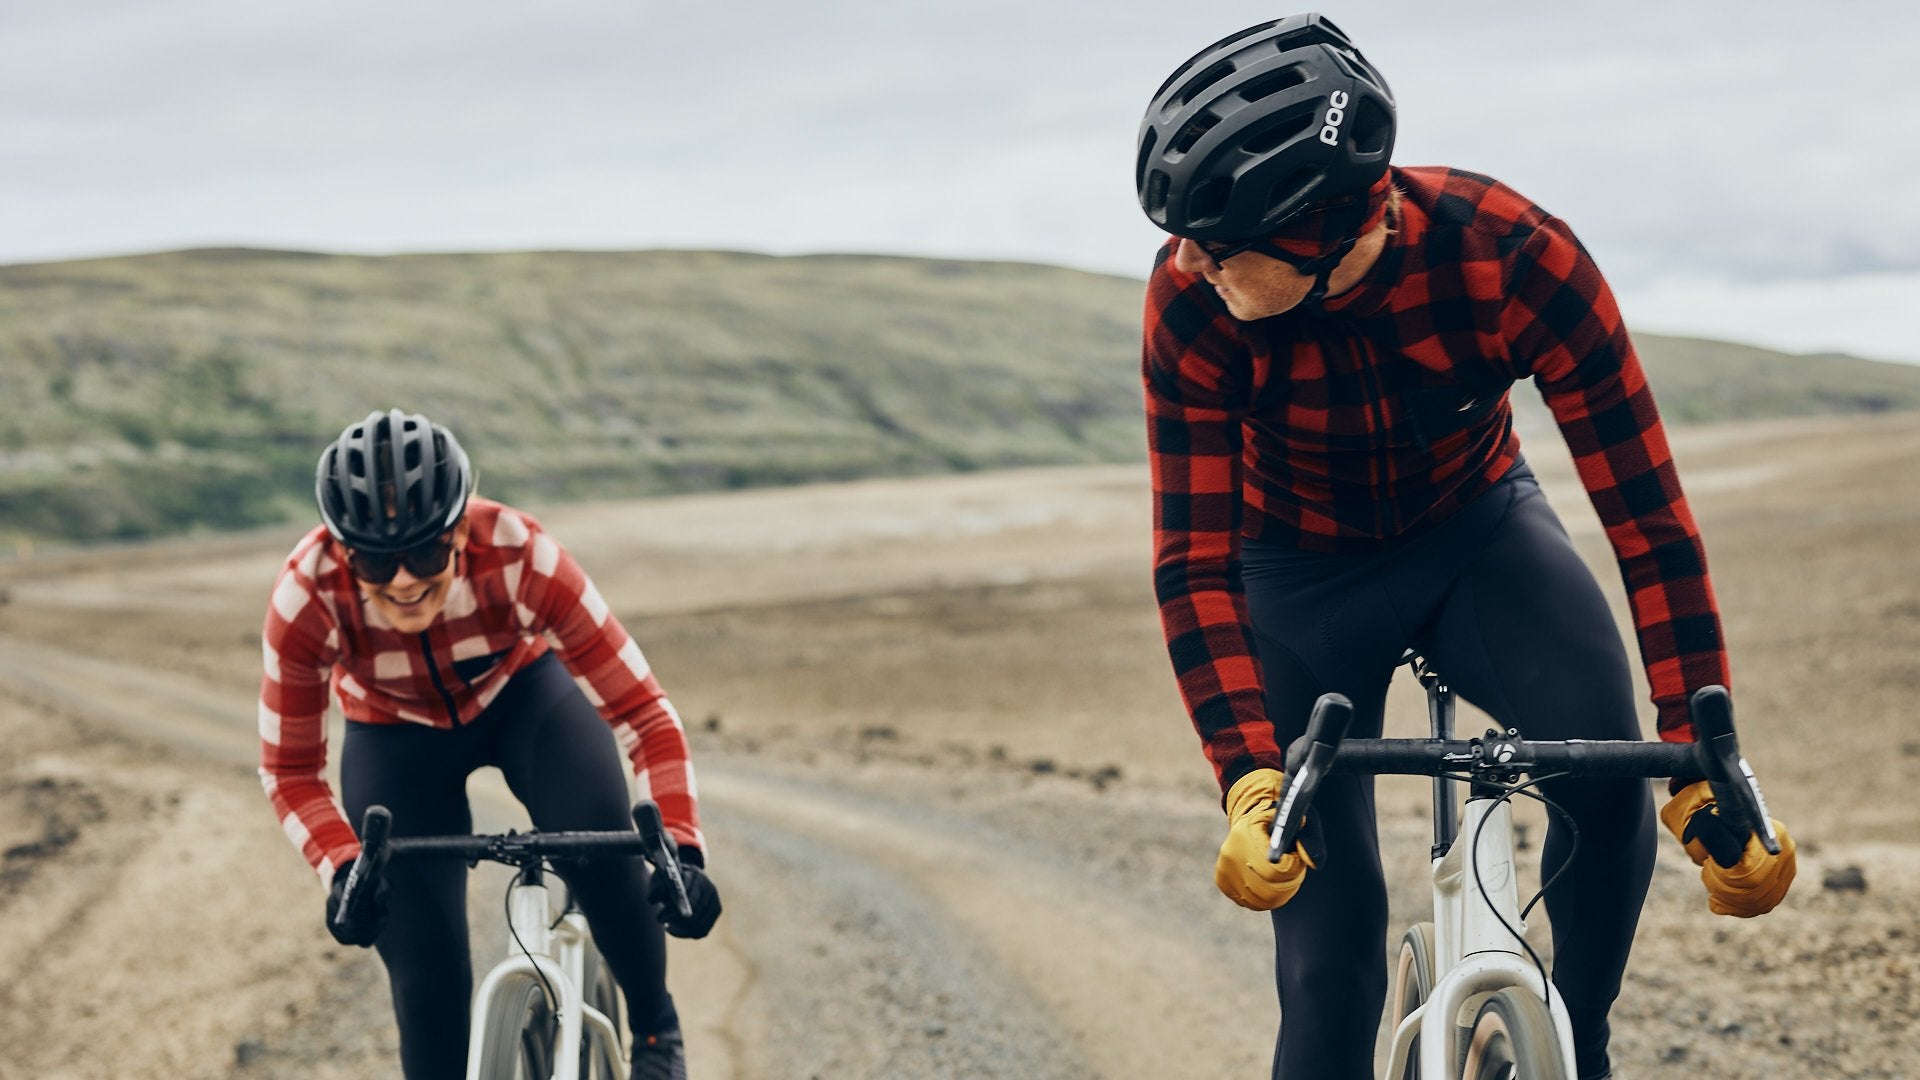 Gravel cyclist in a red flannel jersey, riding with focus and determination on a rugged trail @ Bici.